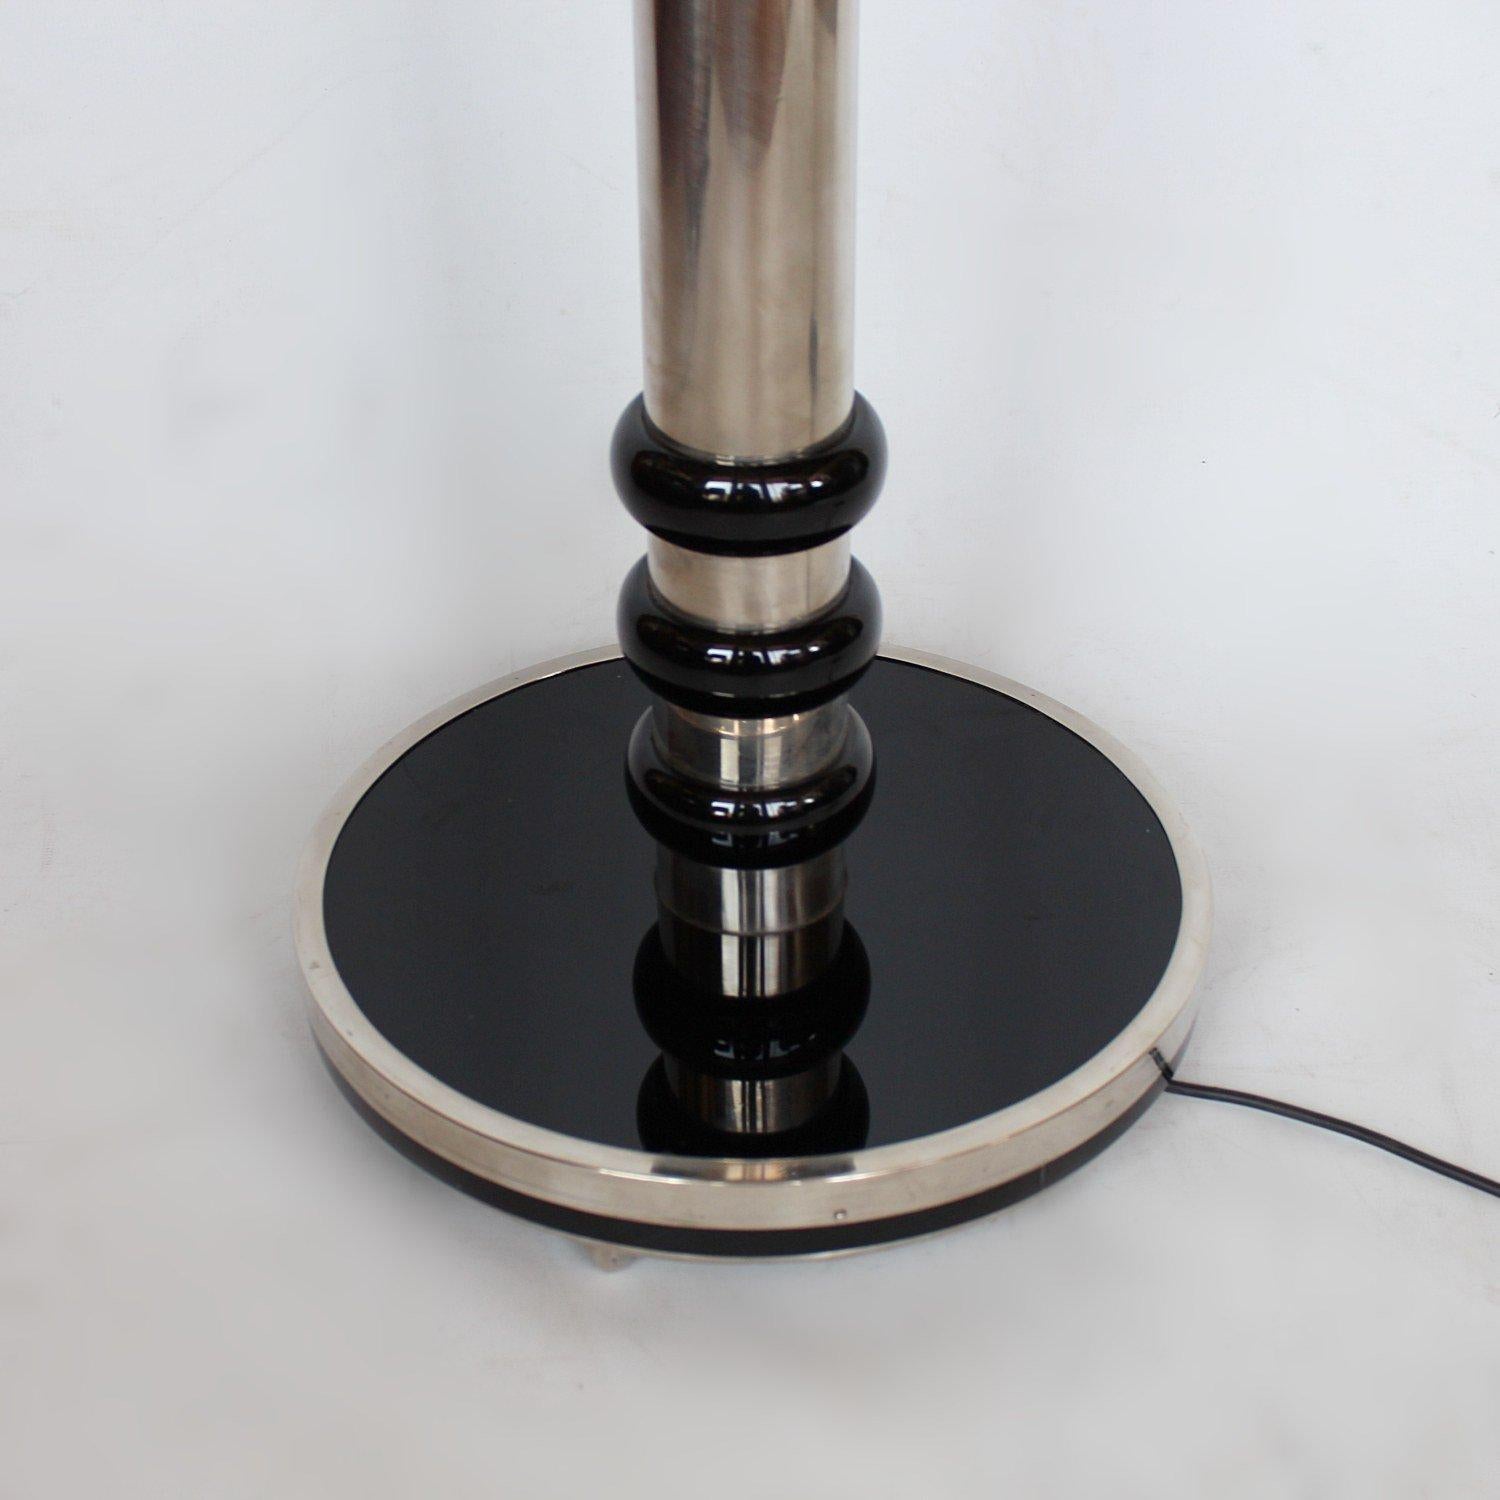 An Art Deco uplighter torchère floor lamp in chromed metal black bakelite base and detail. Refurbished and re-wired.

Dimensions: H 196.5cm, D of shade 29m, D of base 35cm.

 